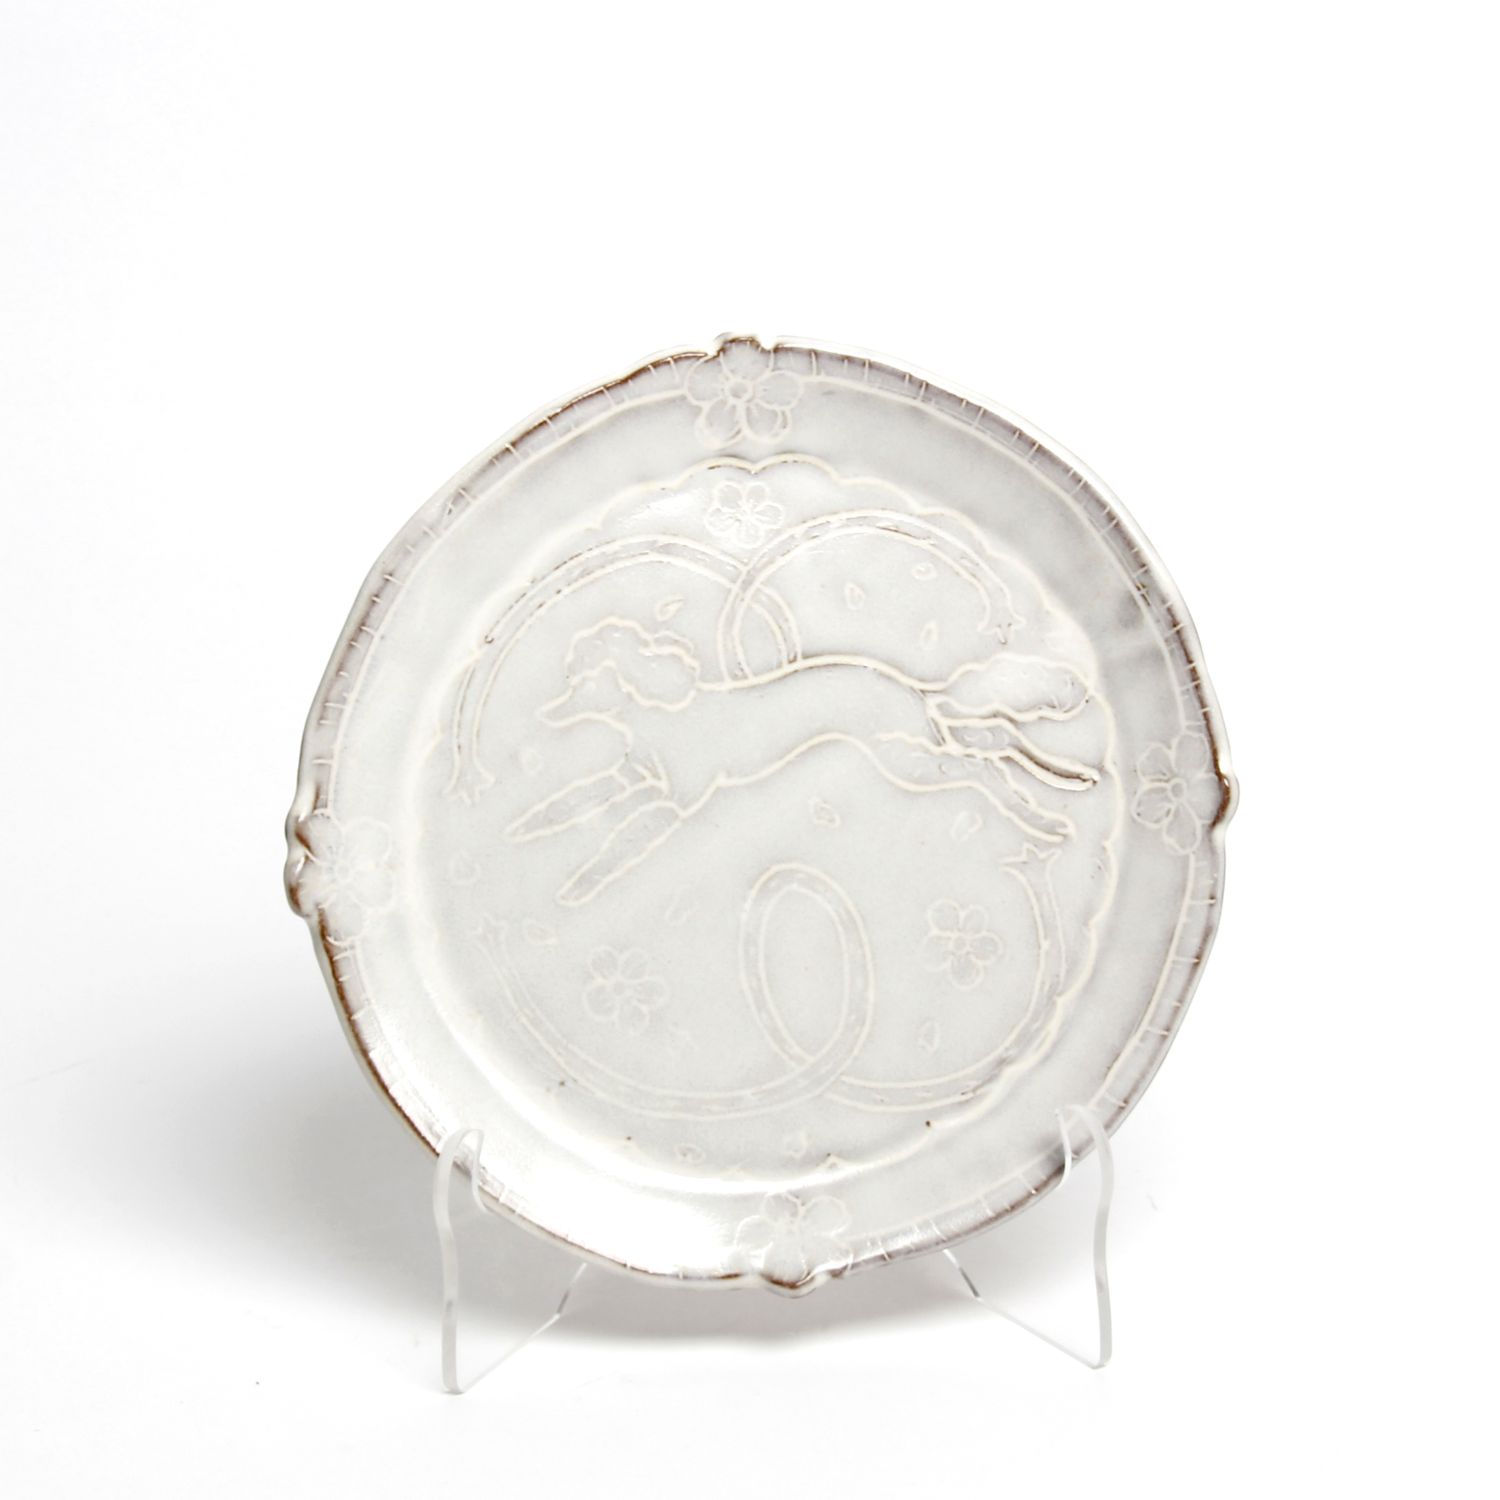 Zoe Pinnell: Small White Poodle Plate Product Image 1 of 3